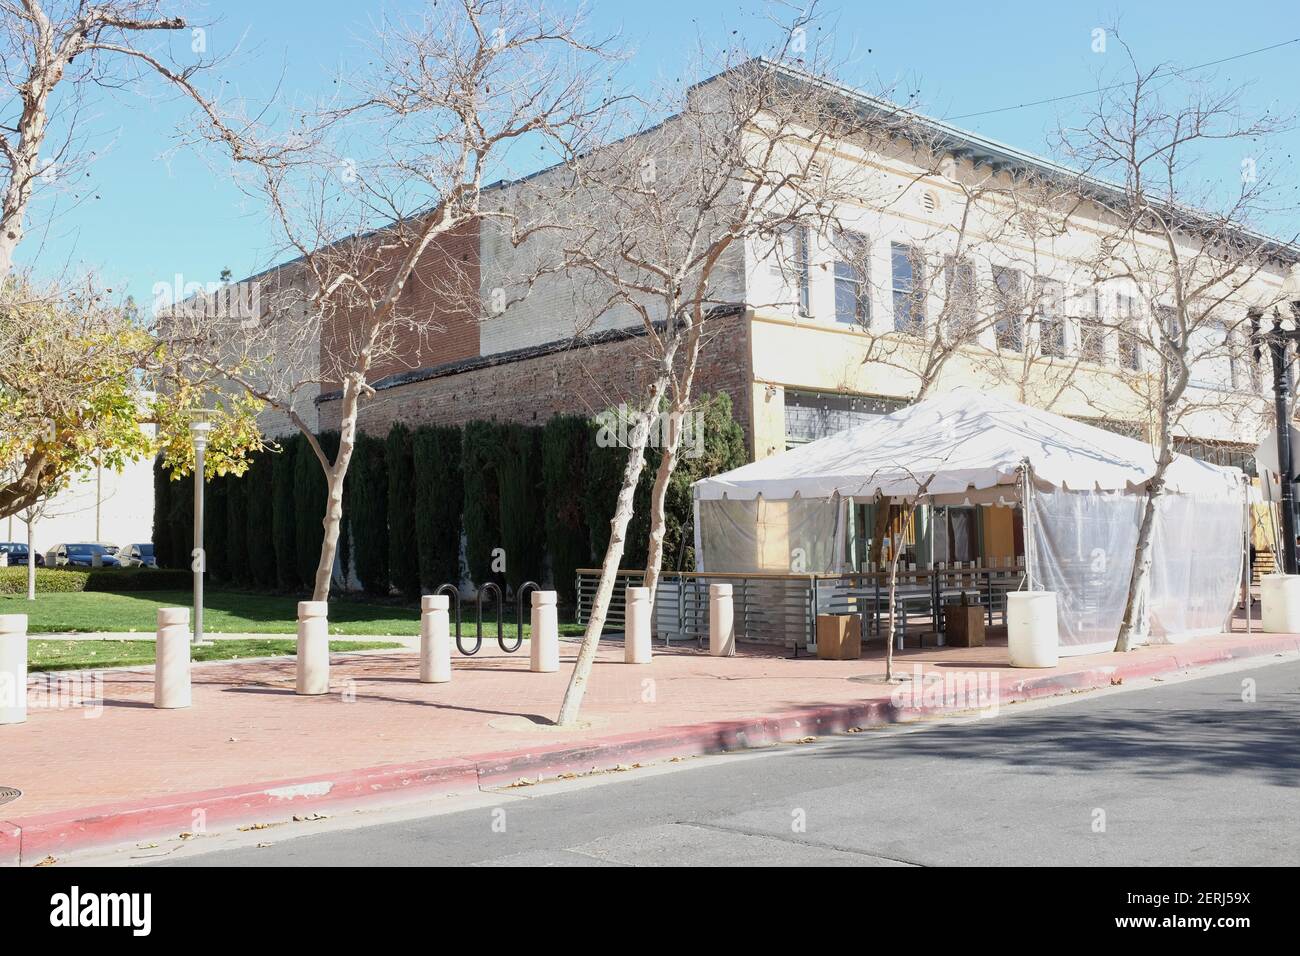 SANTA ANA, CALIFORNIA - 25 FEB 2021: Awnings and tents on a sidewalk outside a restaurant during the pandemic. Stock Photo